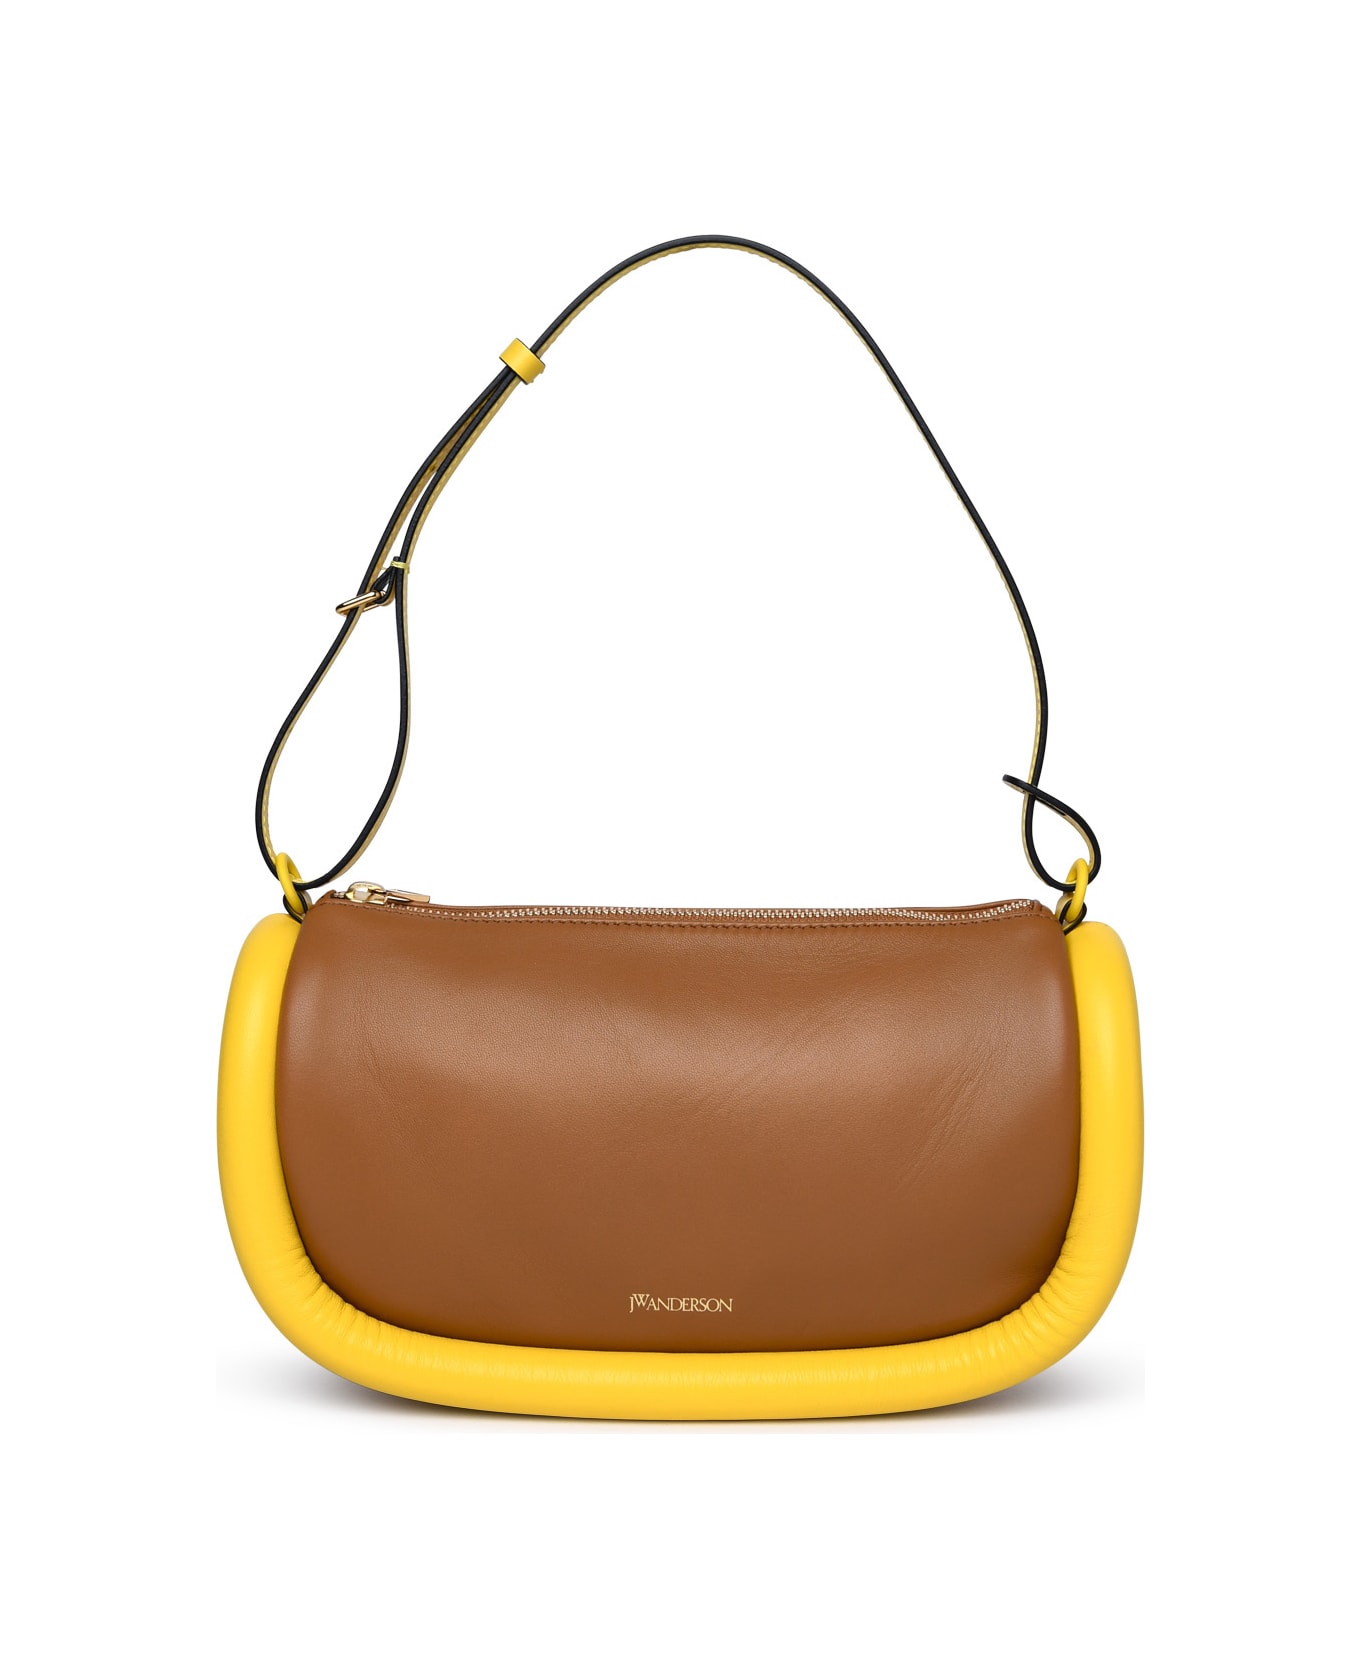 J.W. Anderson Two-tone Leather Bag - Brown